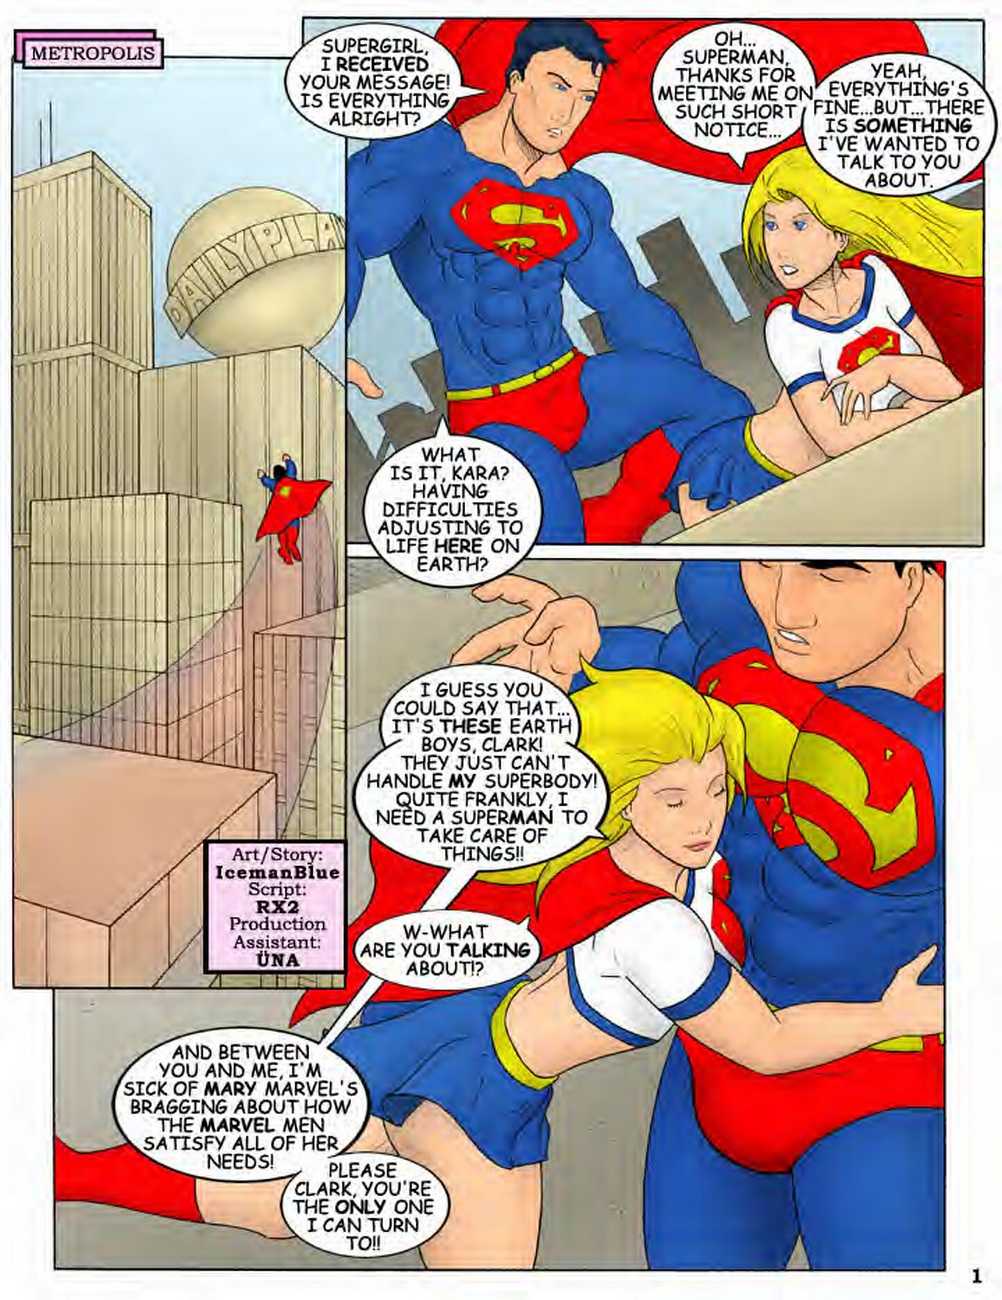 Supergirl page 2